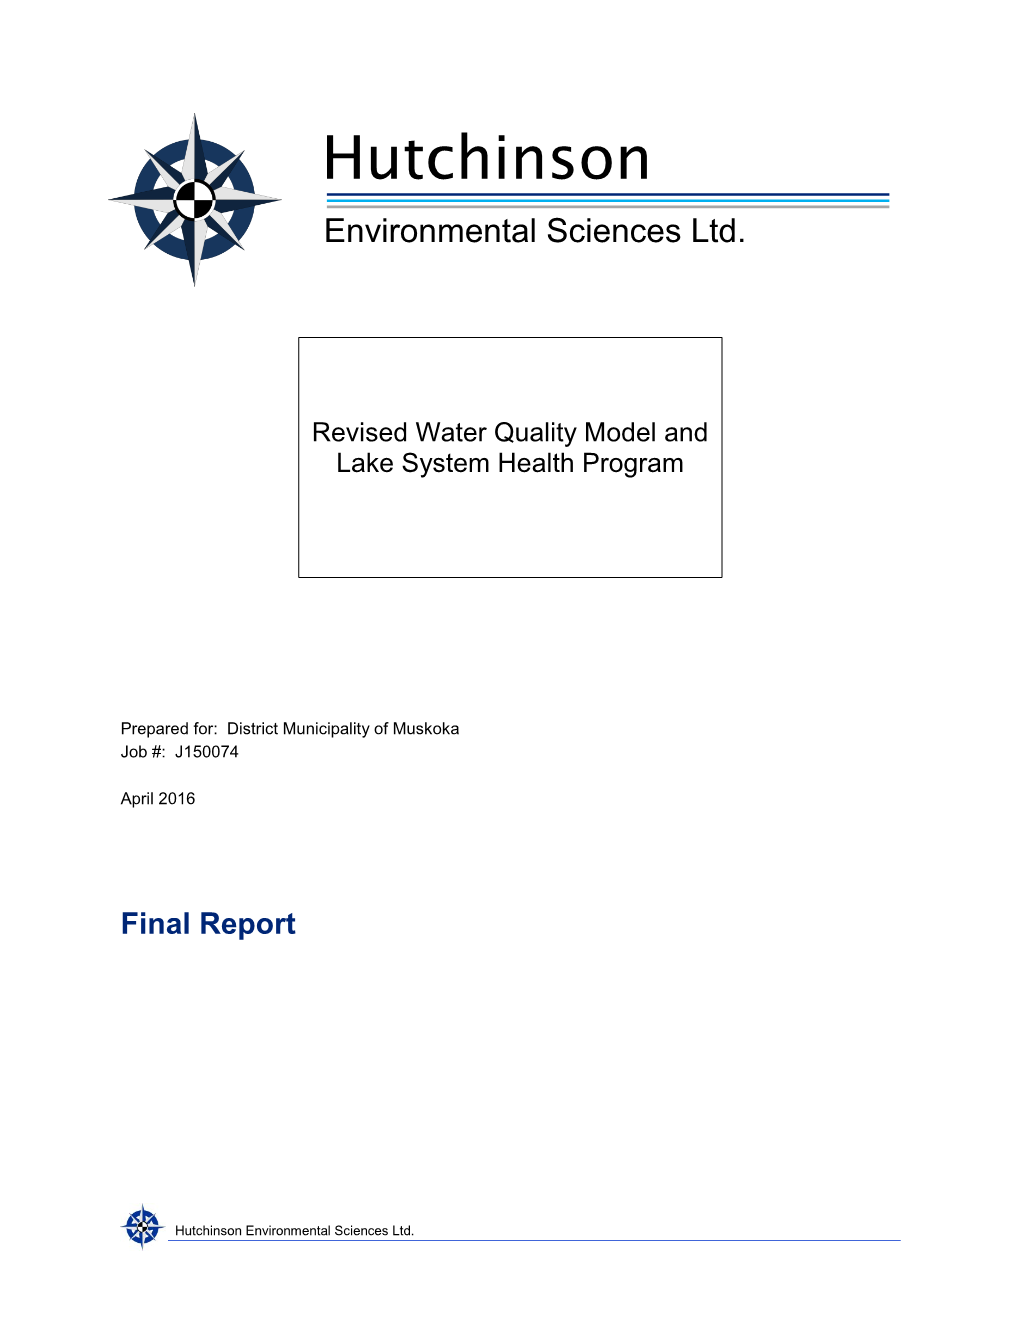 Revised Water Quality Model and Lake System Health Program